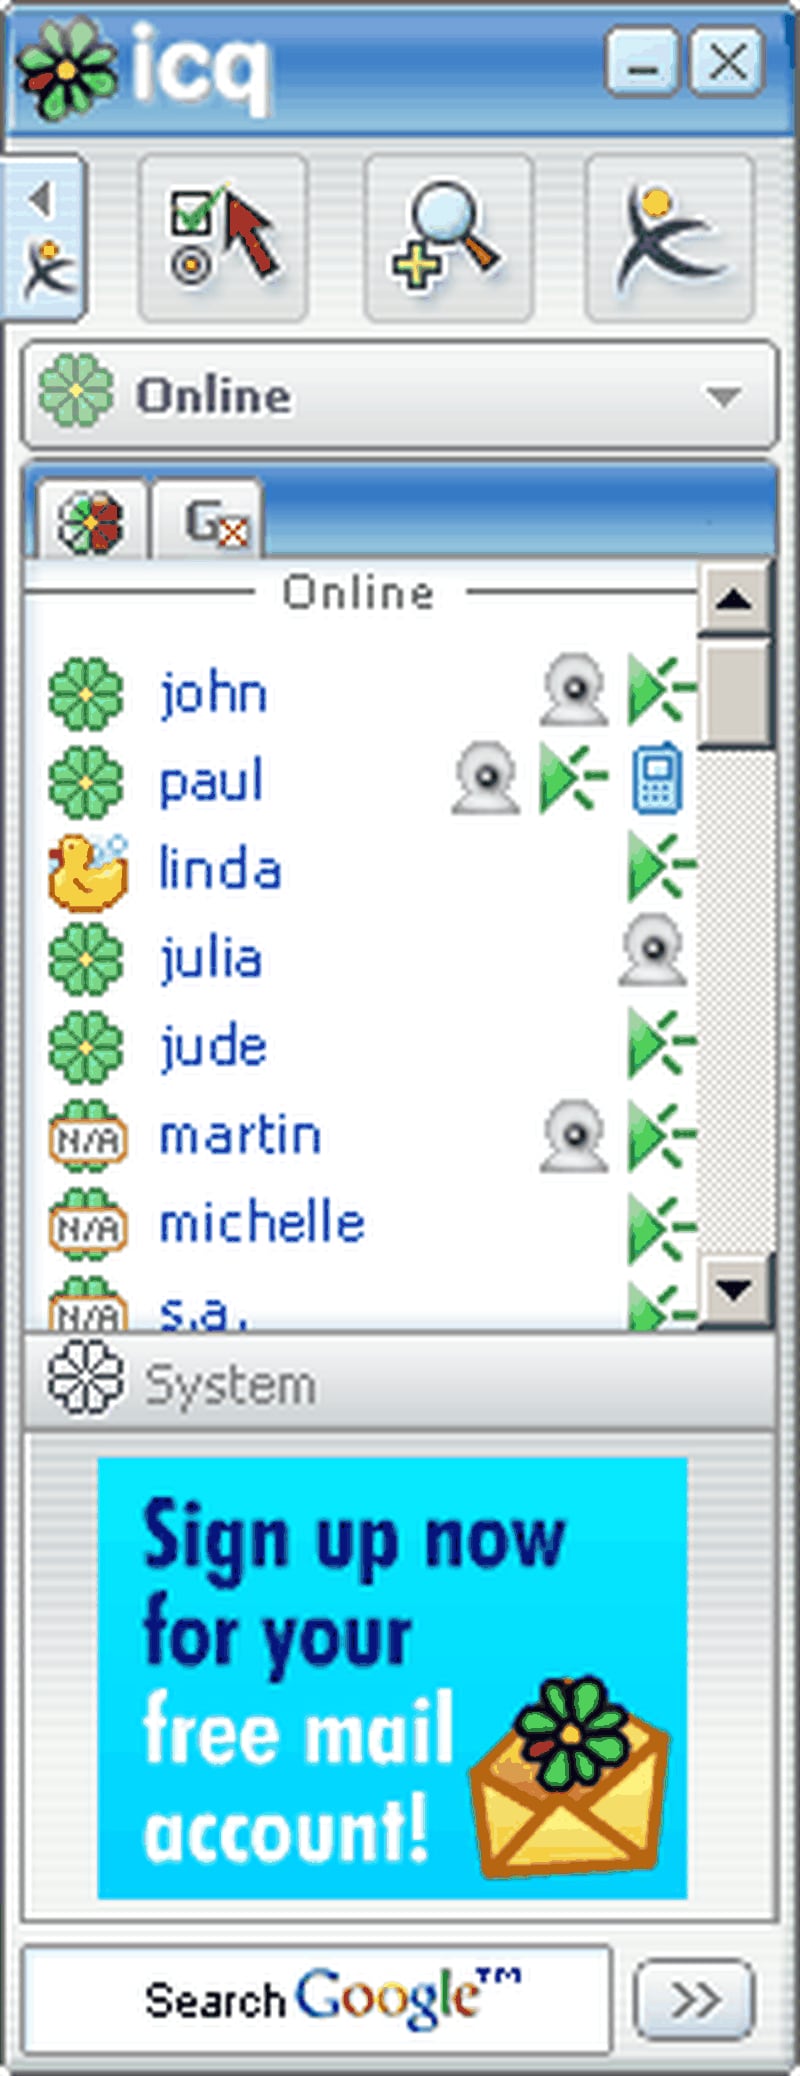 icq web hackers forum chat